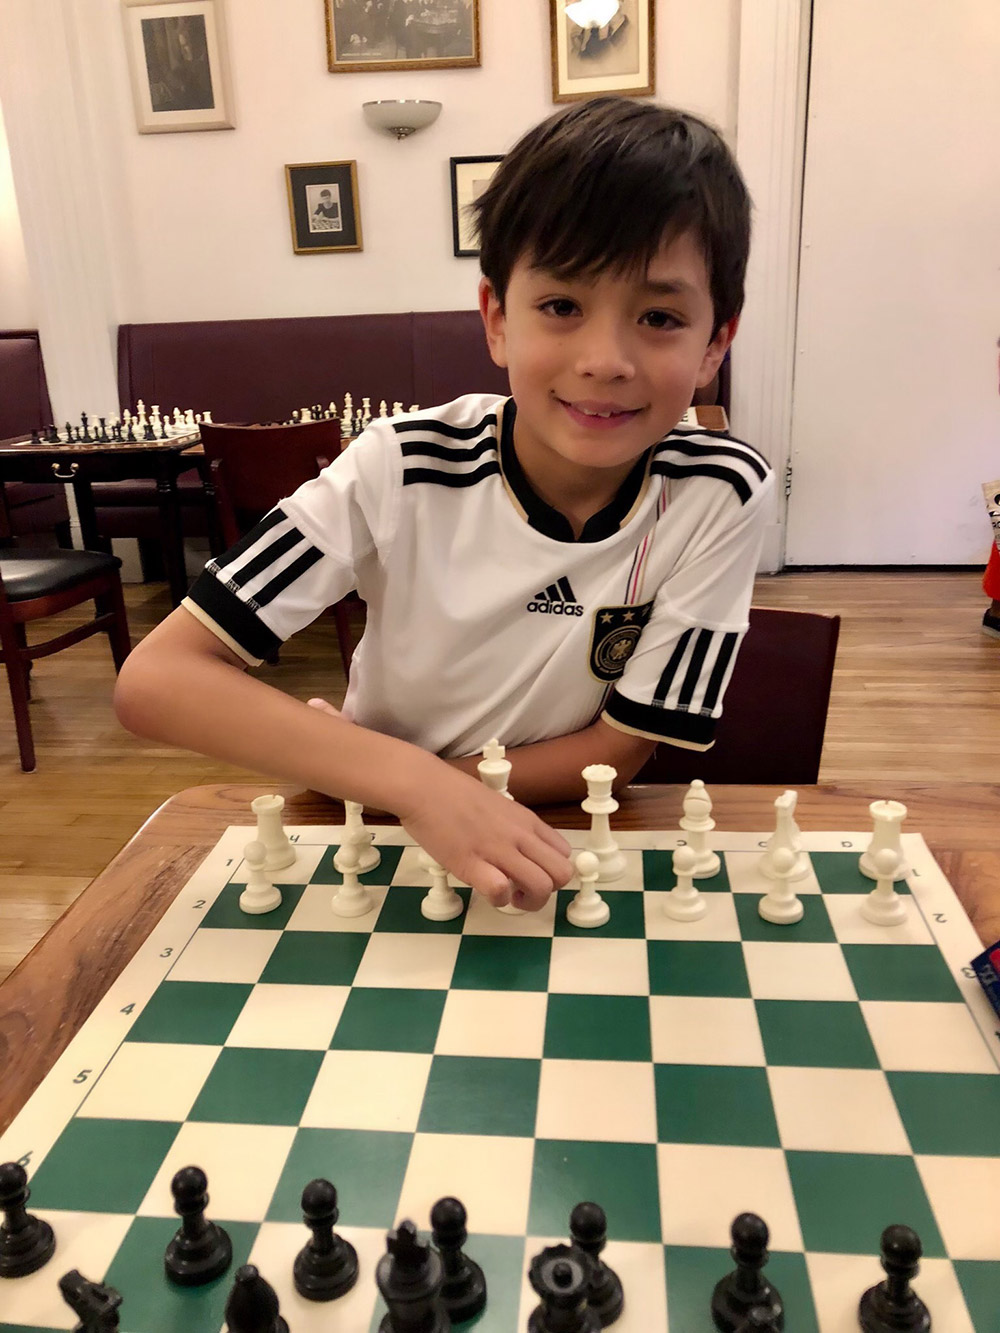 Oliver gets ready for some chess at the legendary Marshall Chess Club in New York City's Greenwich Village. May, 2018